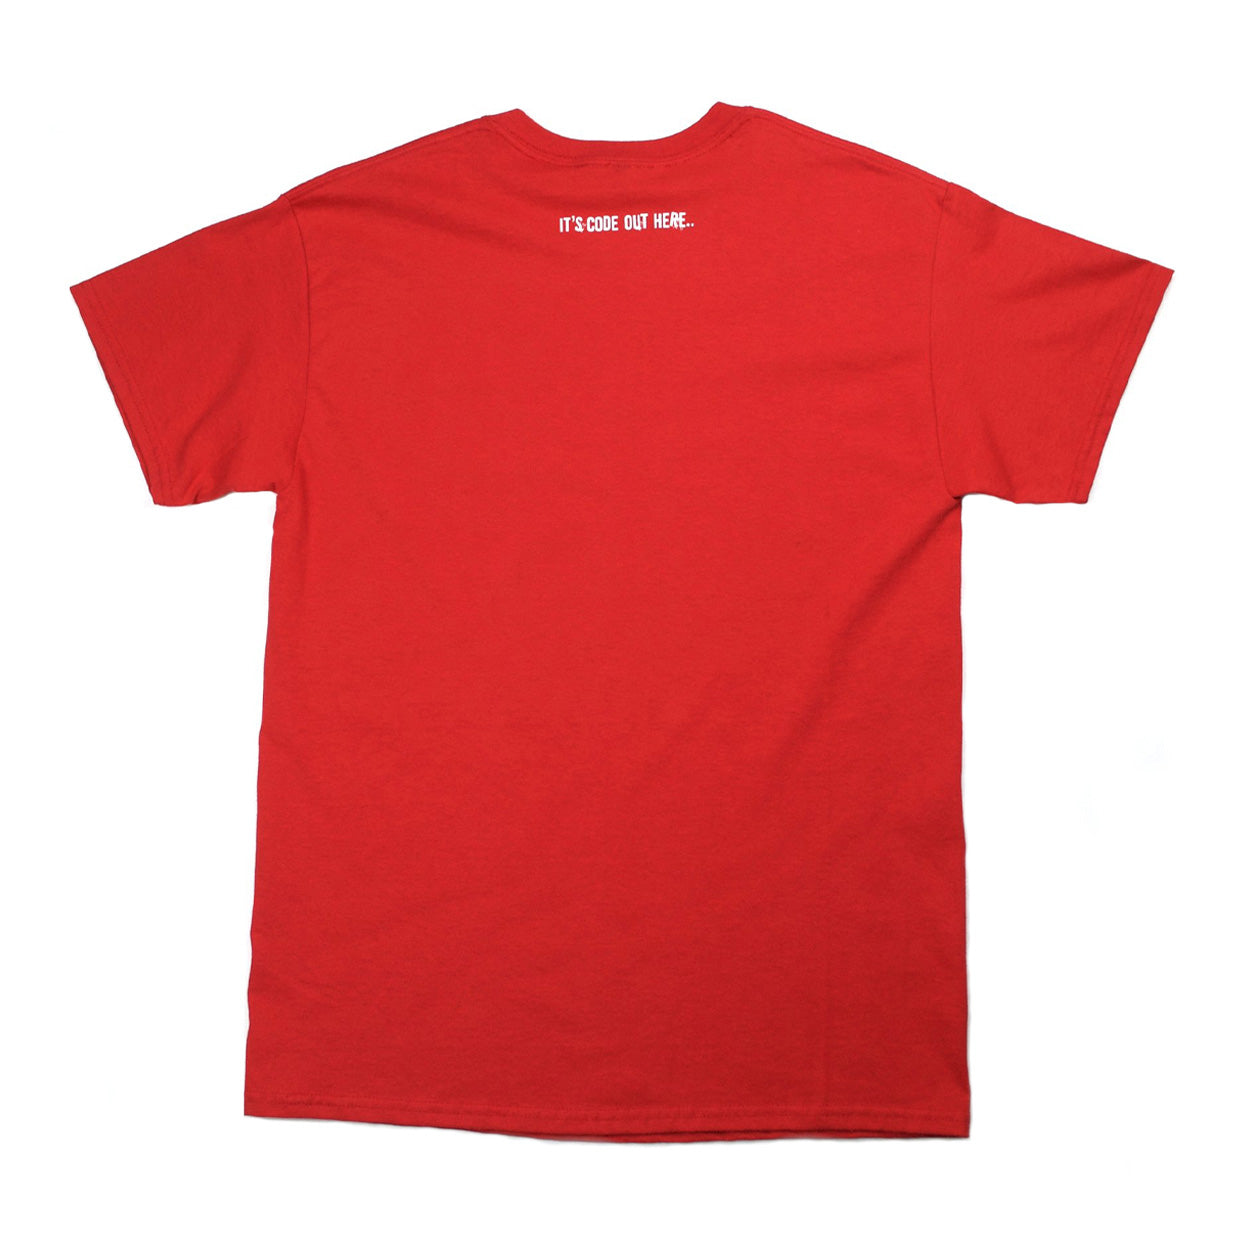 0115 Records - T-Shirts - 0115 x The Tribes - Notts Florist T-shirt (Red)